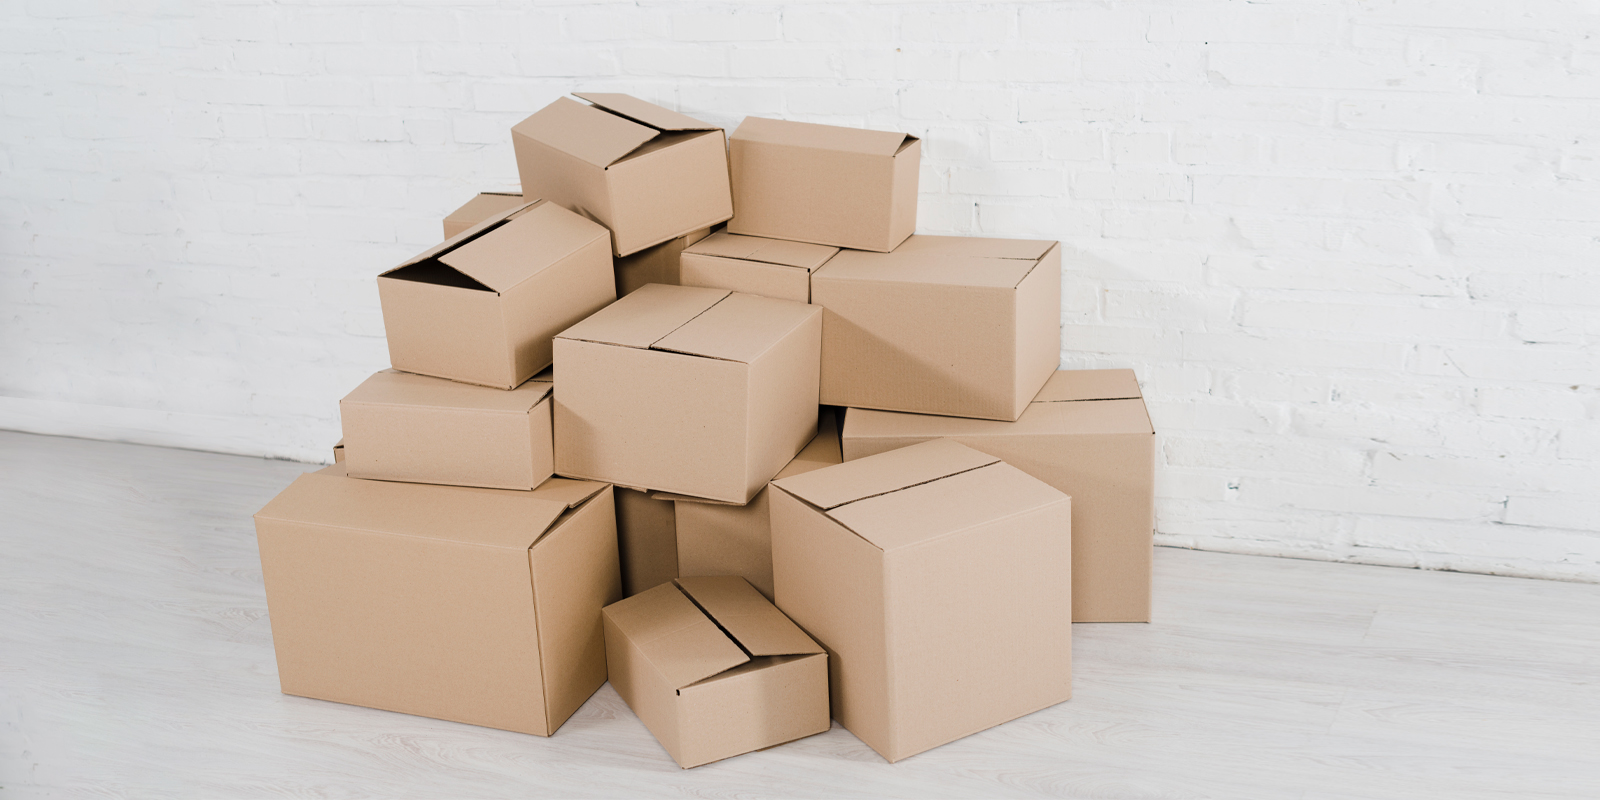 Shipping cartons in Toowoomba - Print with Pagerr